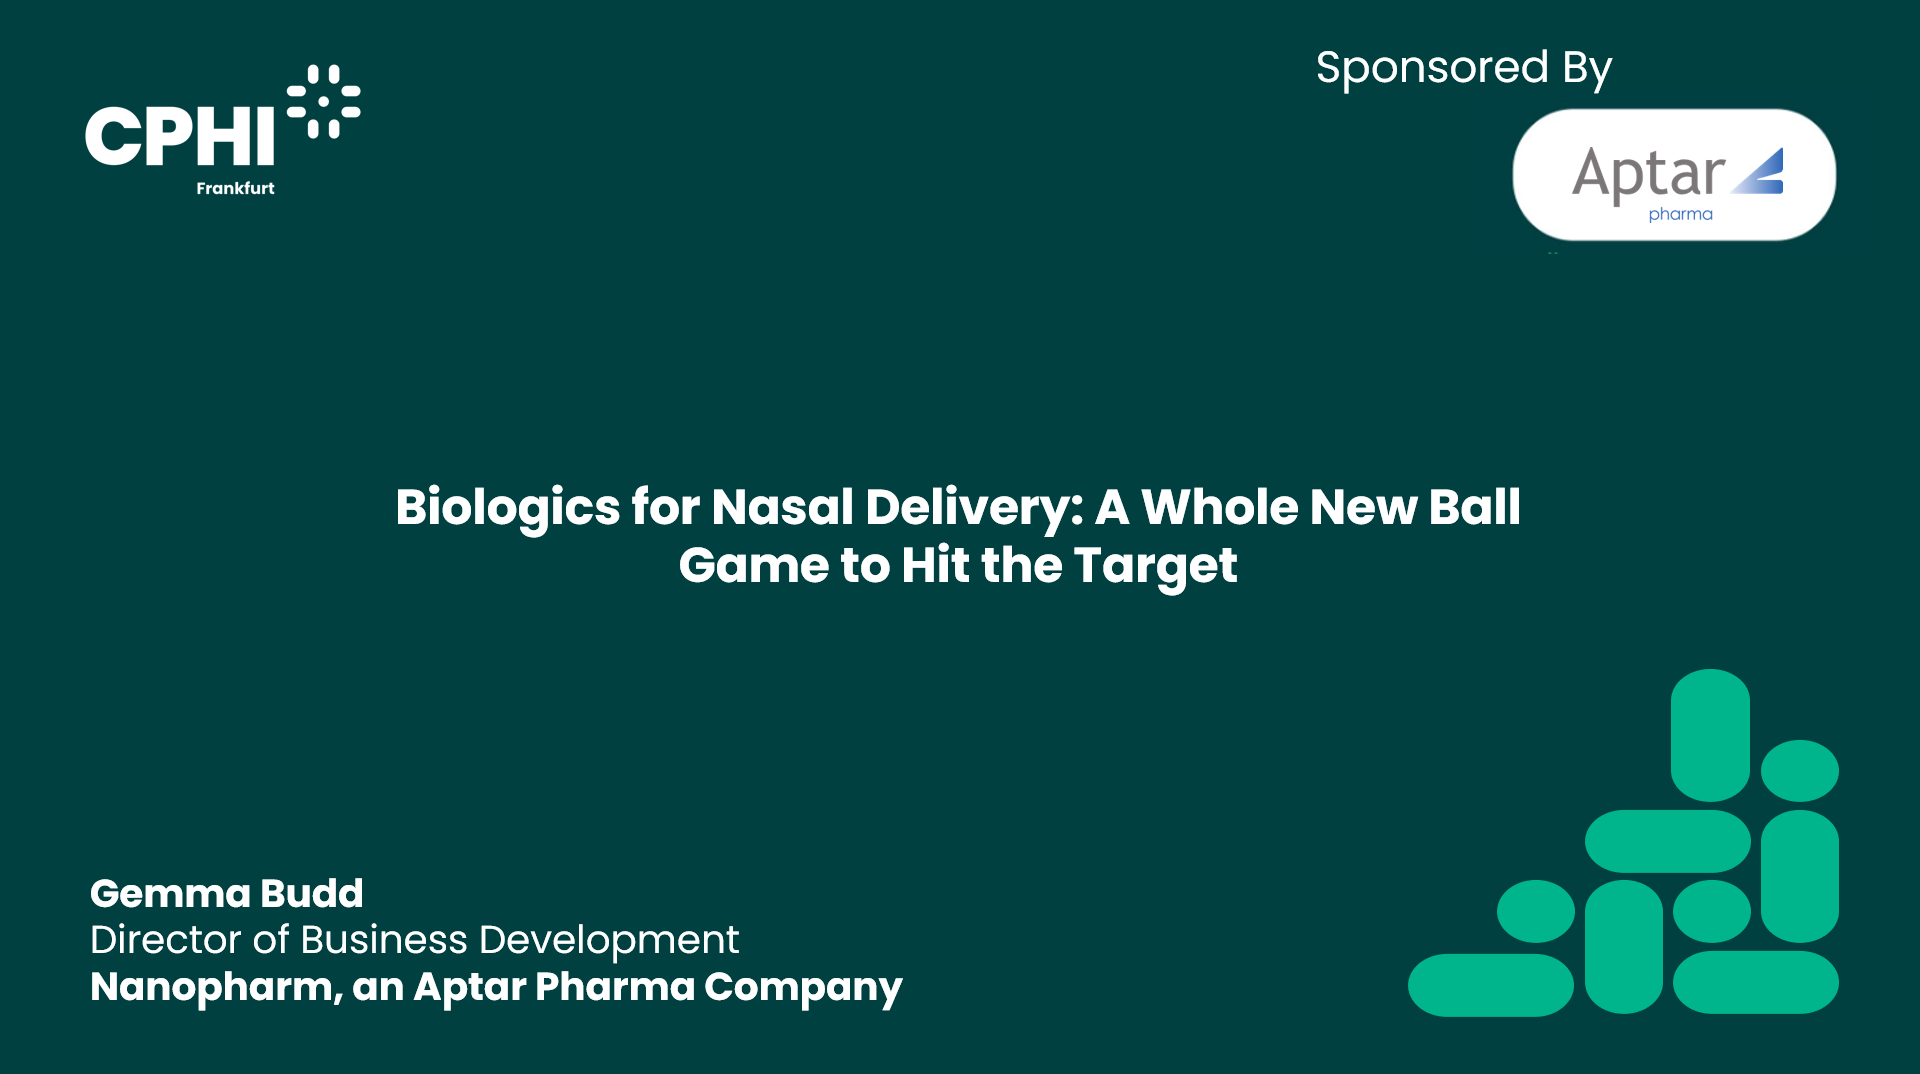 Biologics for Nasal Delivery: A Whole New Ball Game to Hit the Target